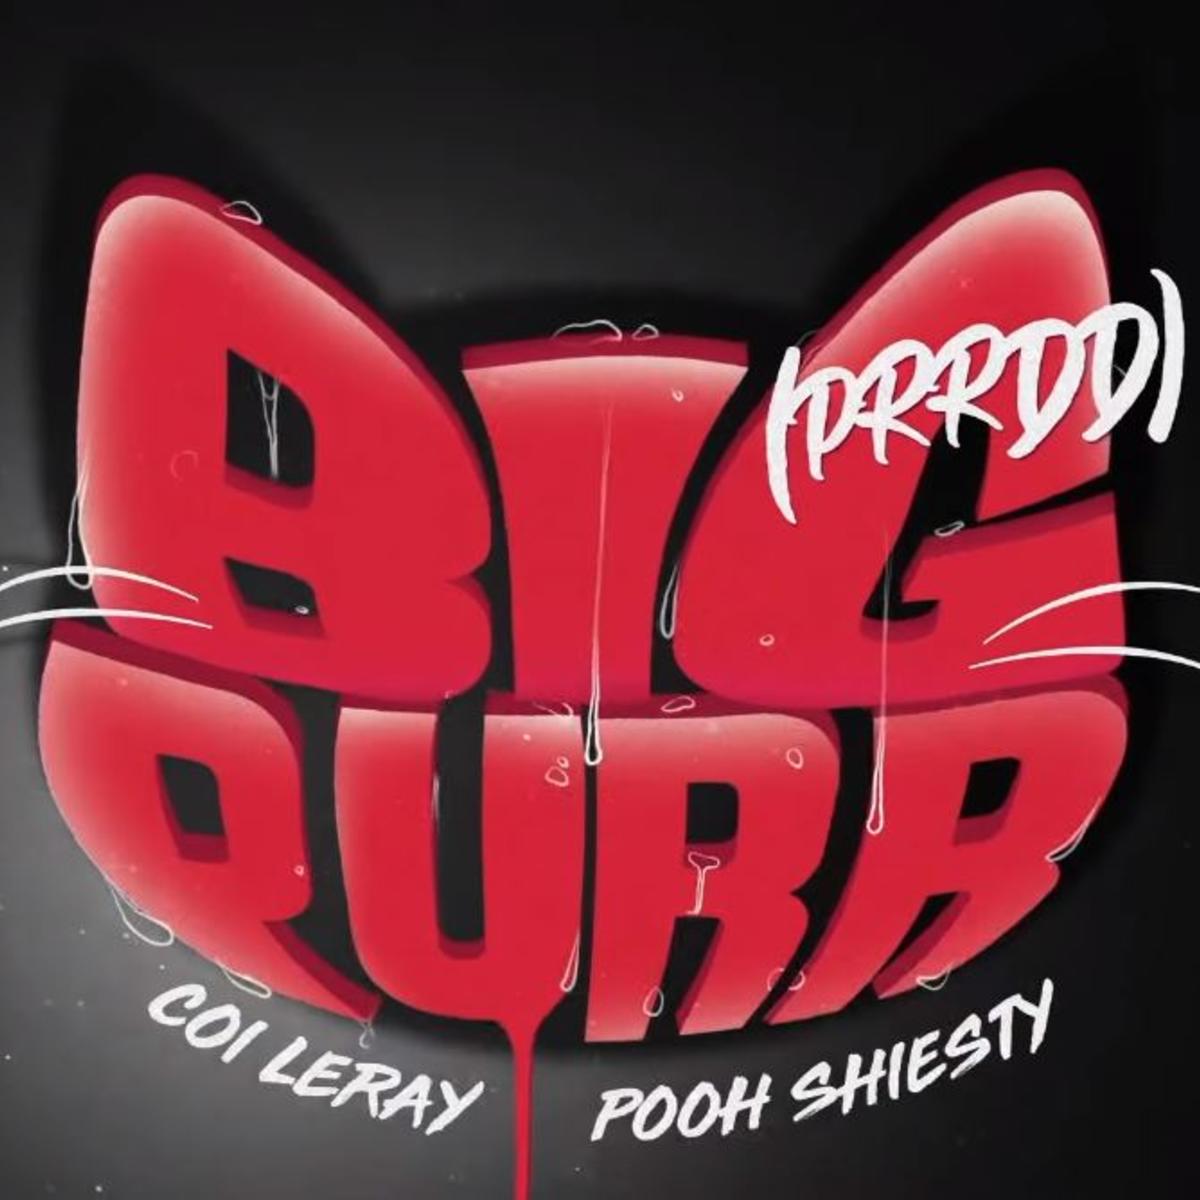 Coi Leray & Pooh Shiesty Join Forces For “Big Purr”